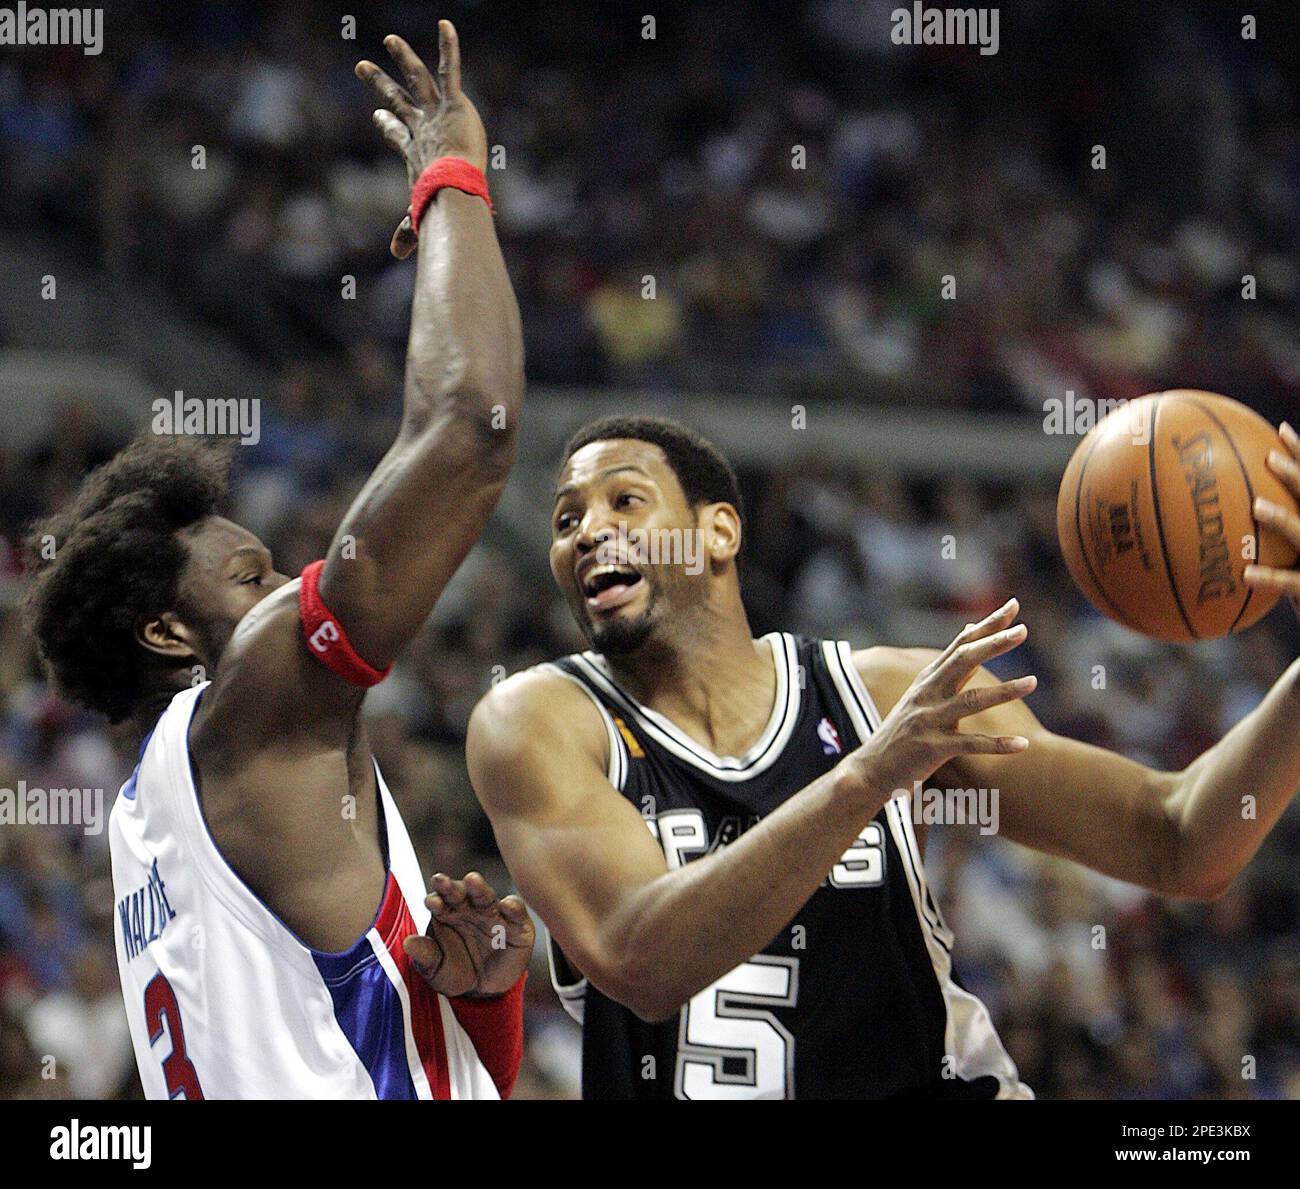 Iverson beats Kings for first win with Pistons - The San Diego